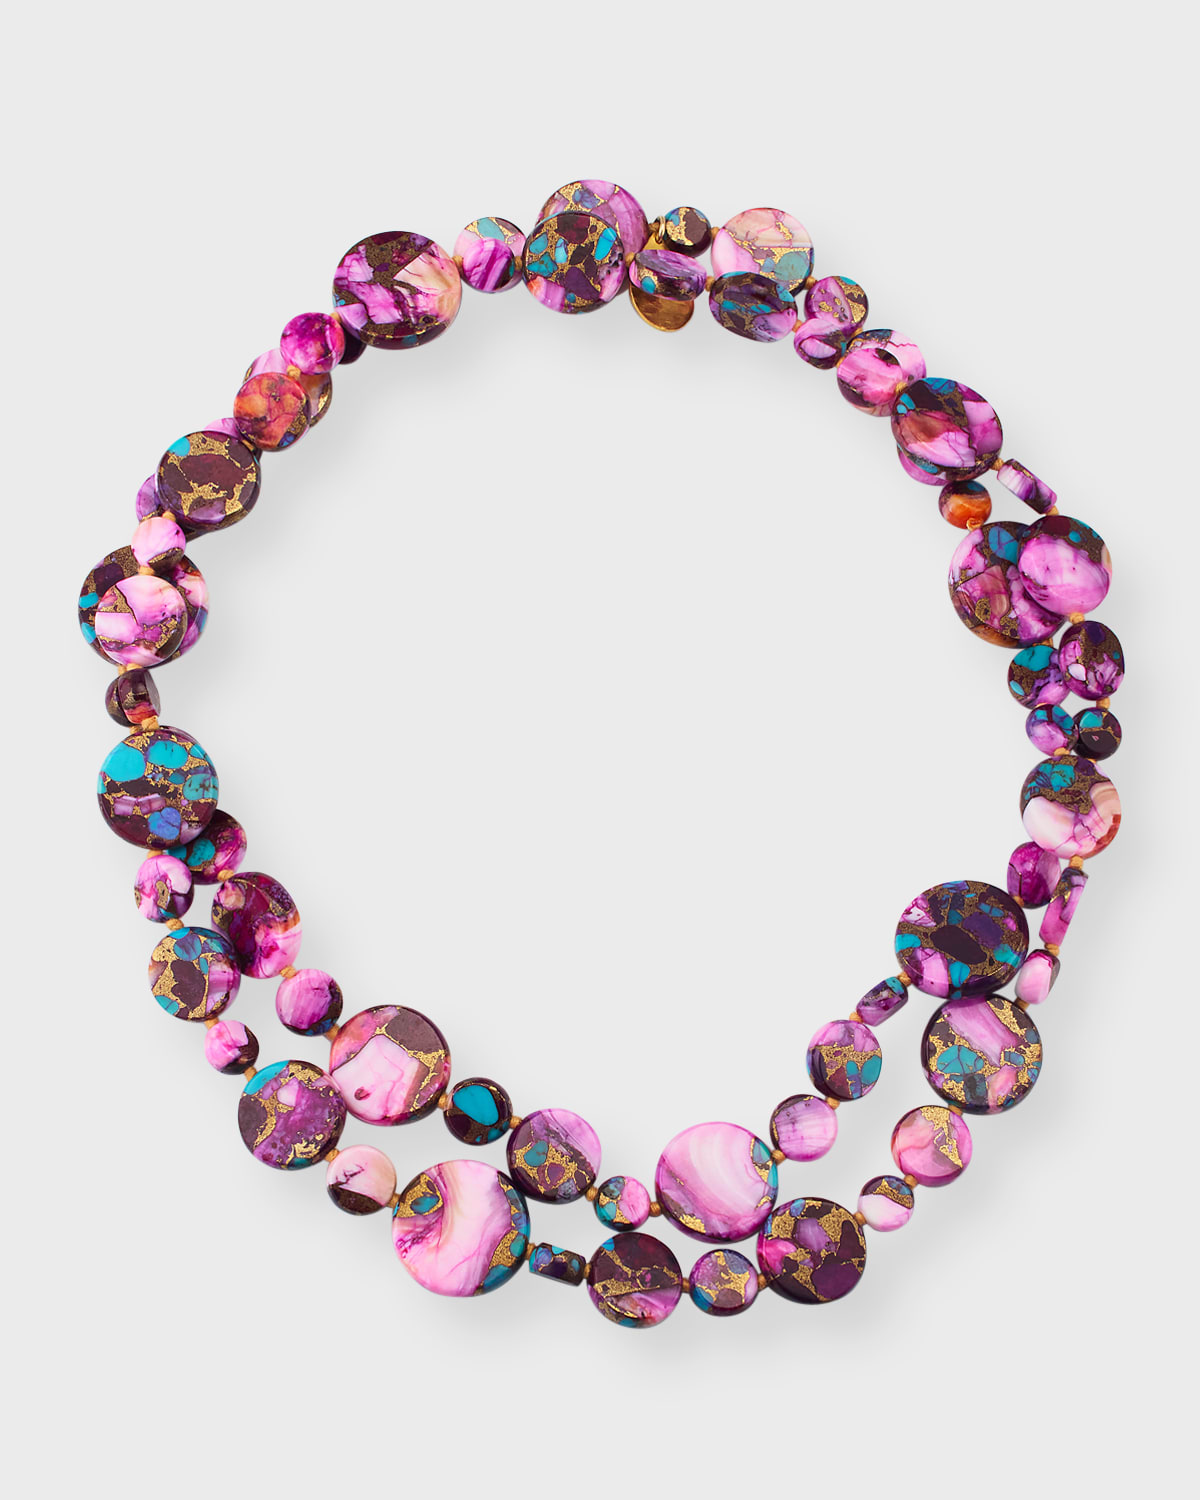 Devon Leigh Long Turquoise Spiny Oyster Coin Necklace, 36"l In Pink